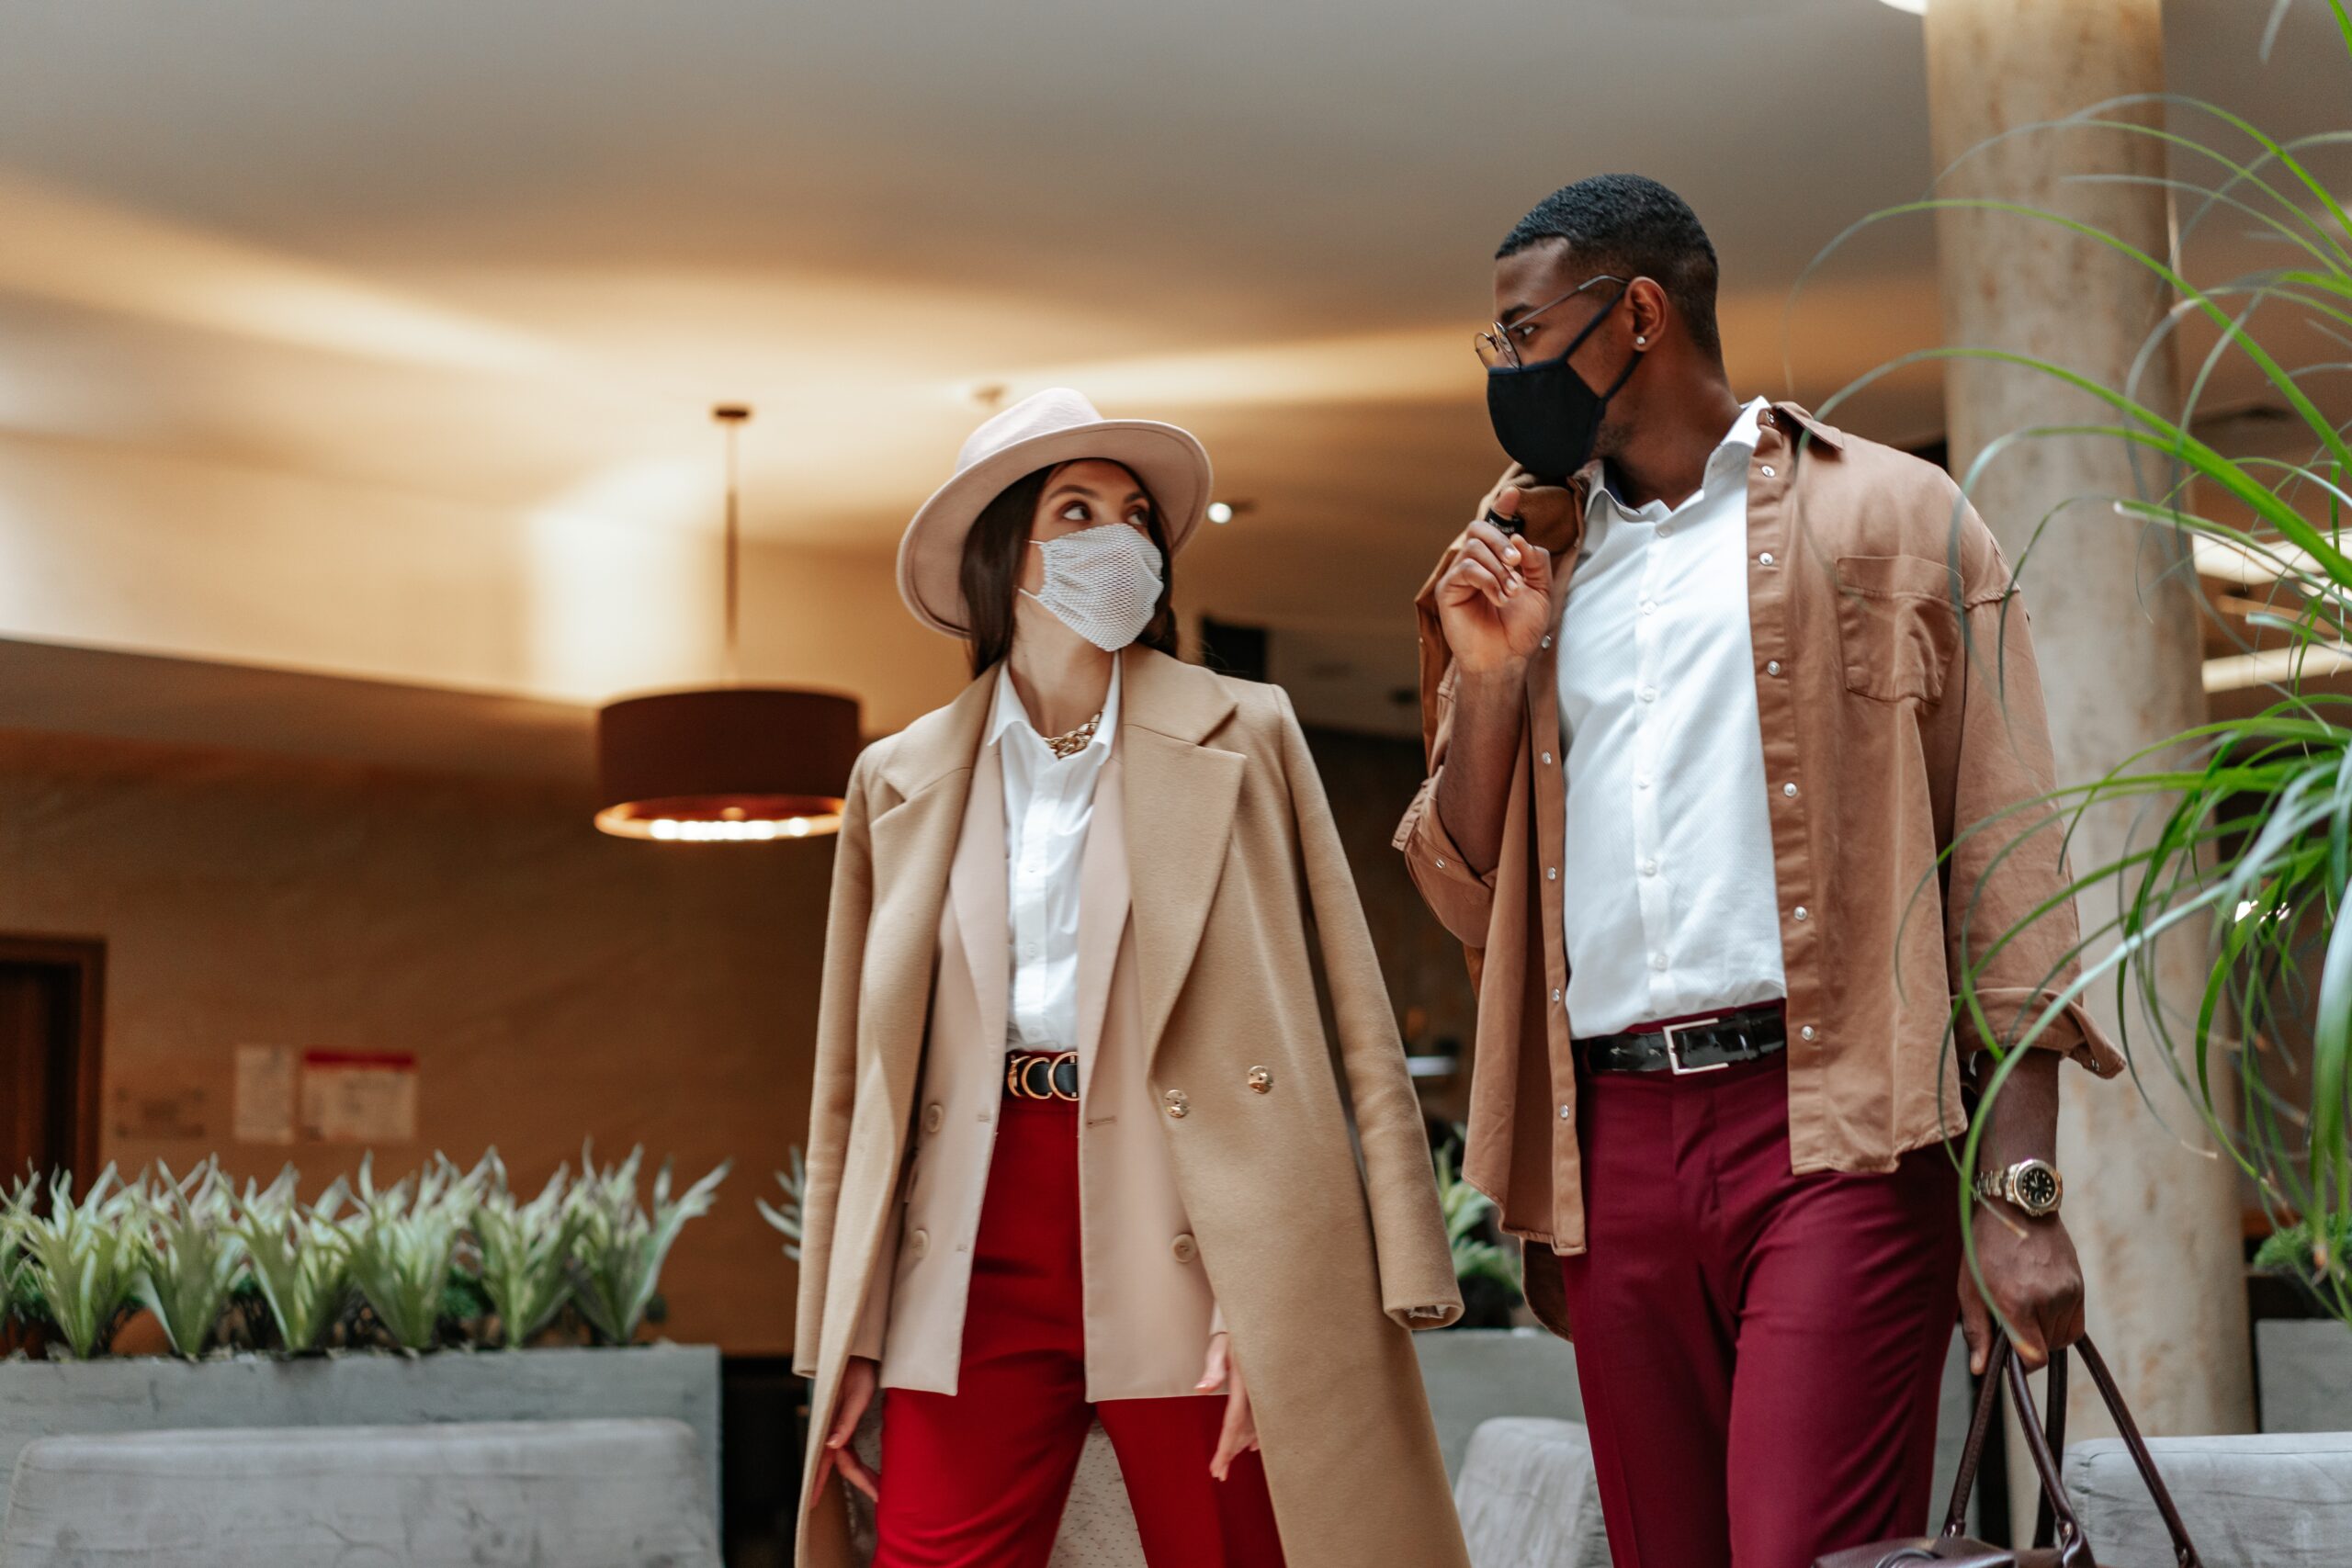 man and woman in airport going on a business trip. They are both waring red pants and khaki coats and carry their luggage. 10 Tips To Help You Reduce Costs And Increase Efficiency.